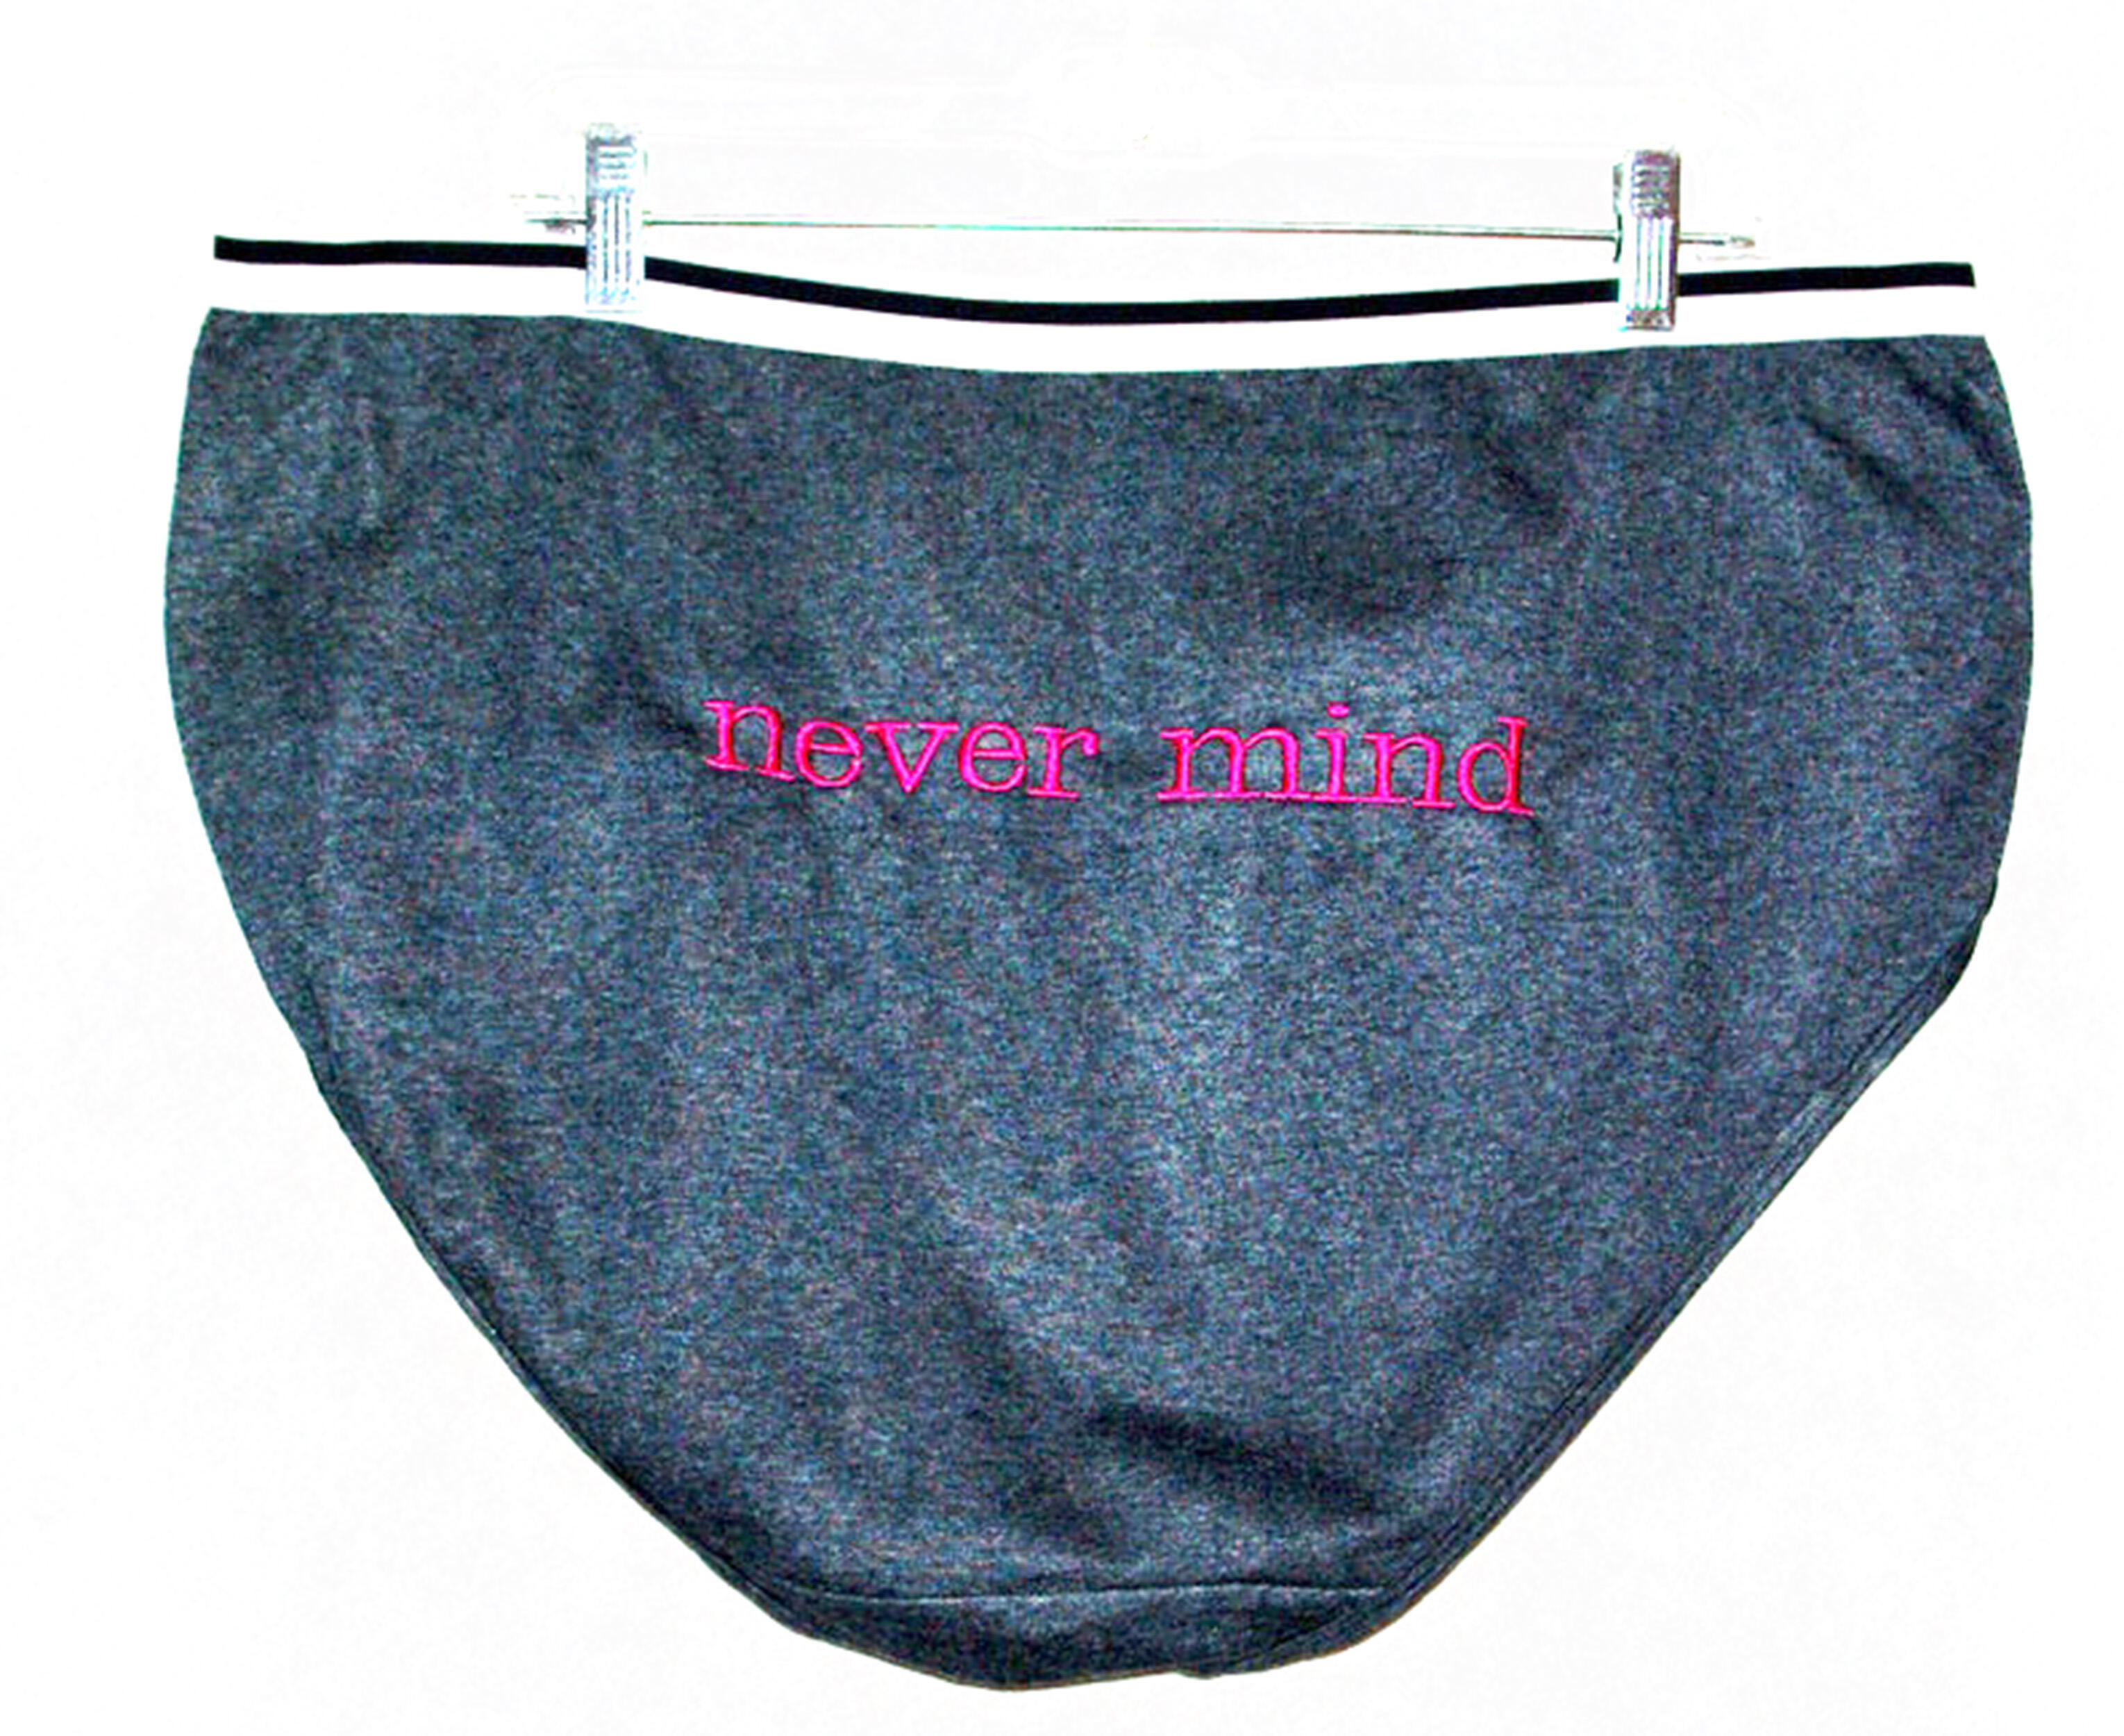 These Are My Big Girl Granny Panties Embroidered Monogrammed Ugly Gag Gift  Funny Extra Large Size Panties Ready to Ship TODAY AGFT 052 